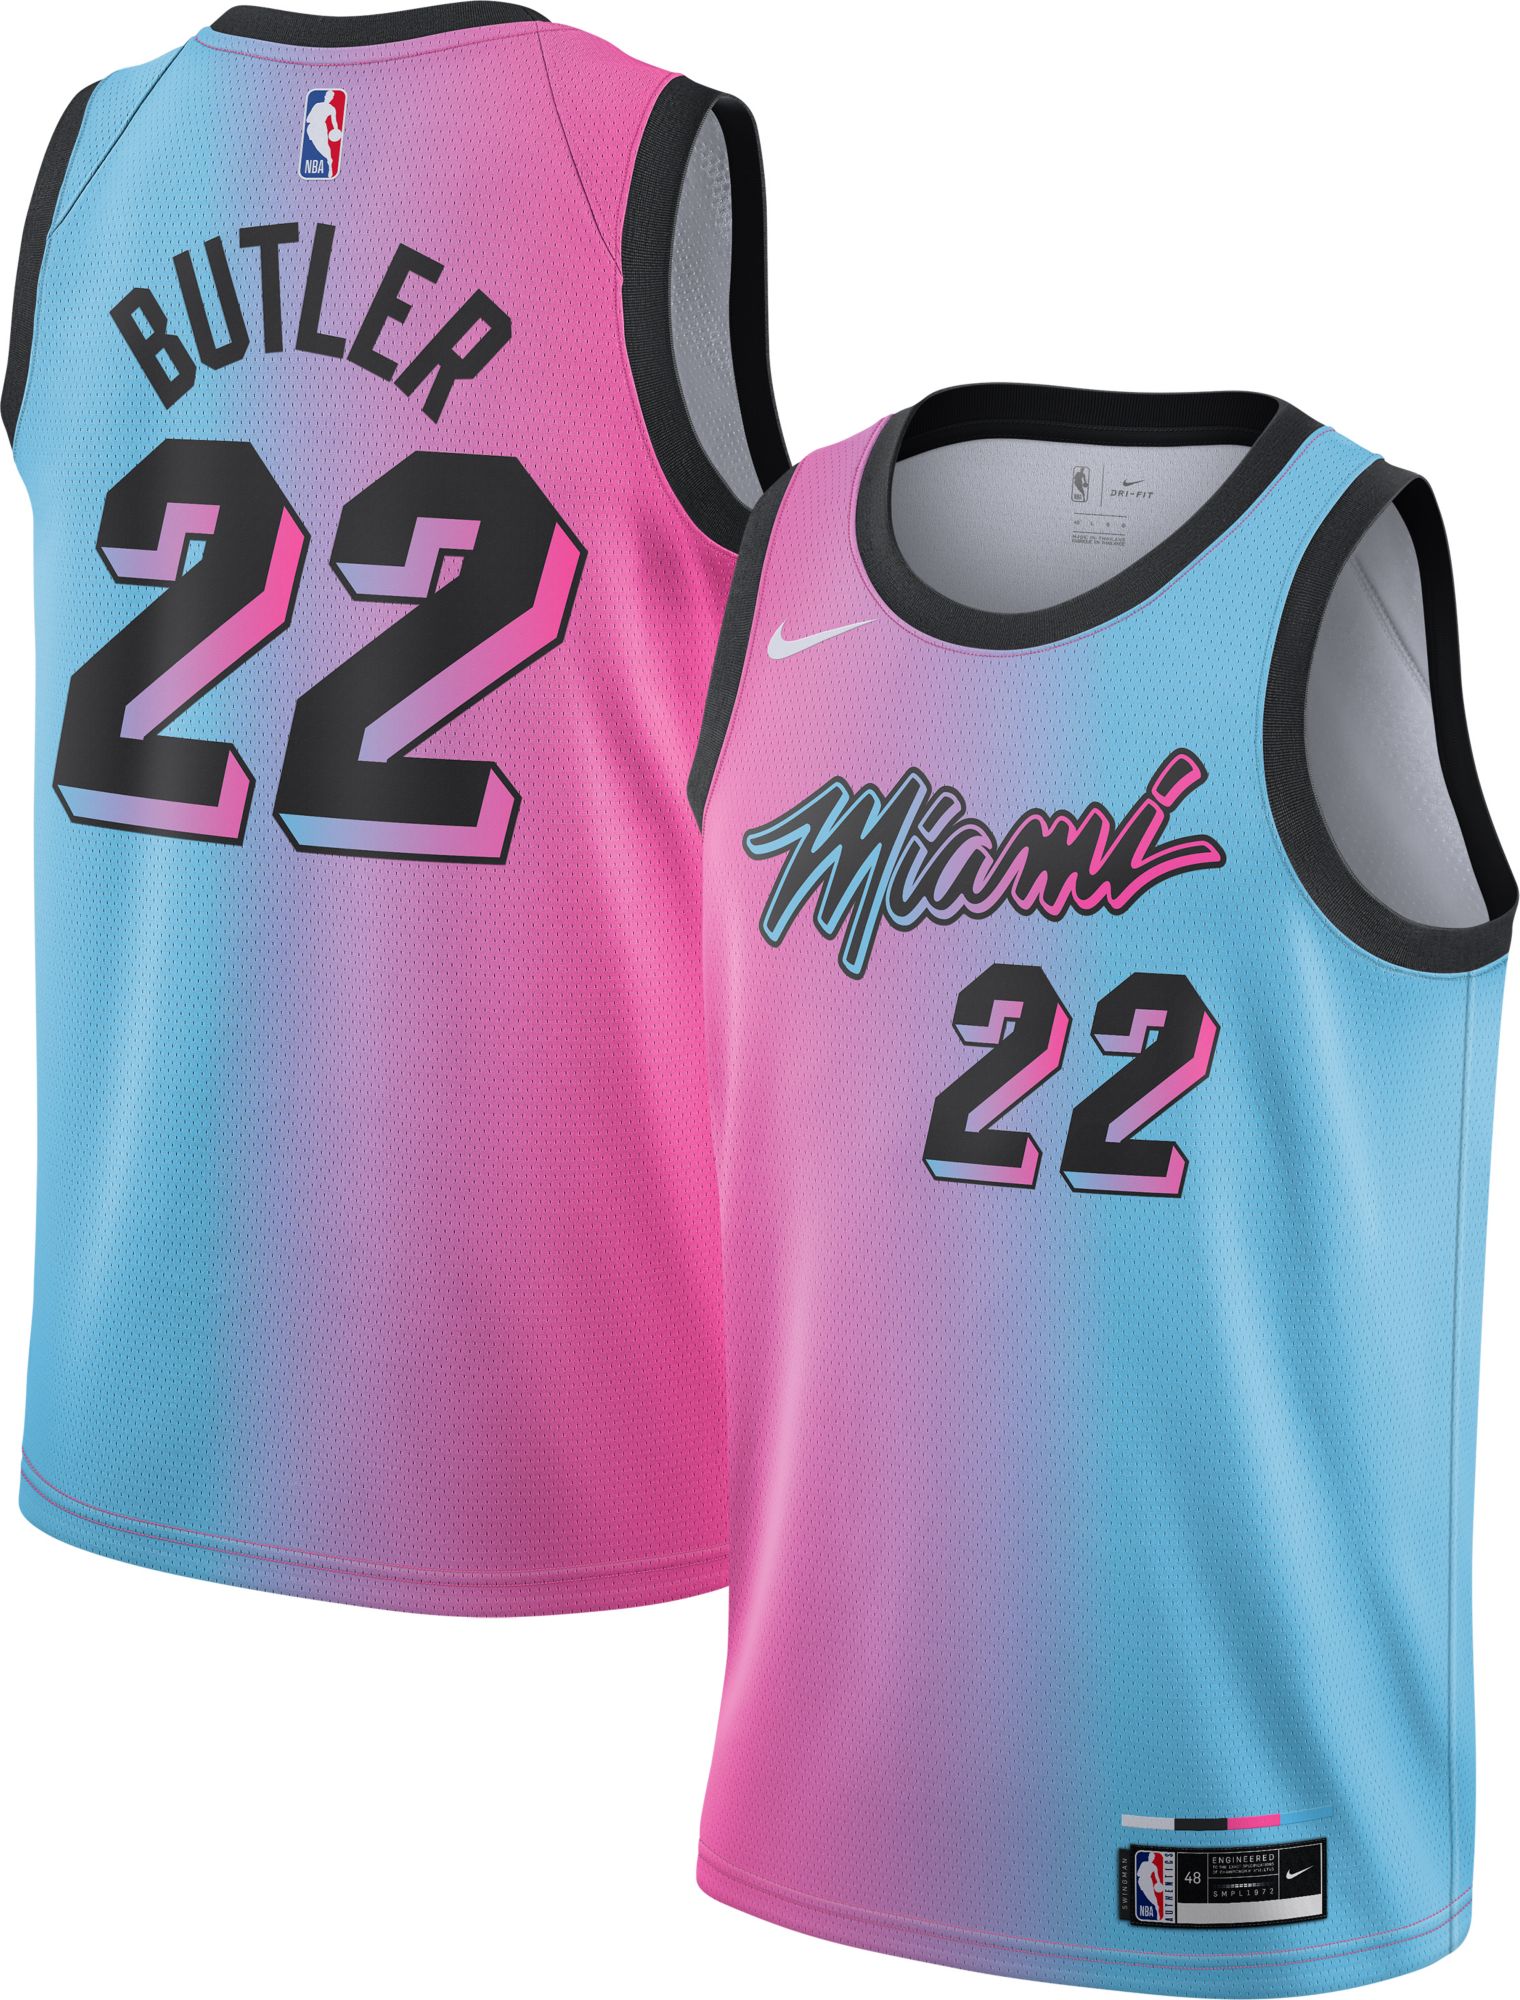 jimmy butler vice jersey youth